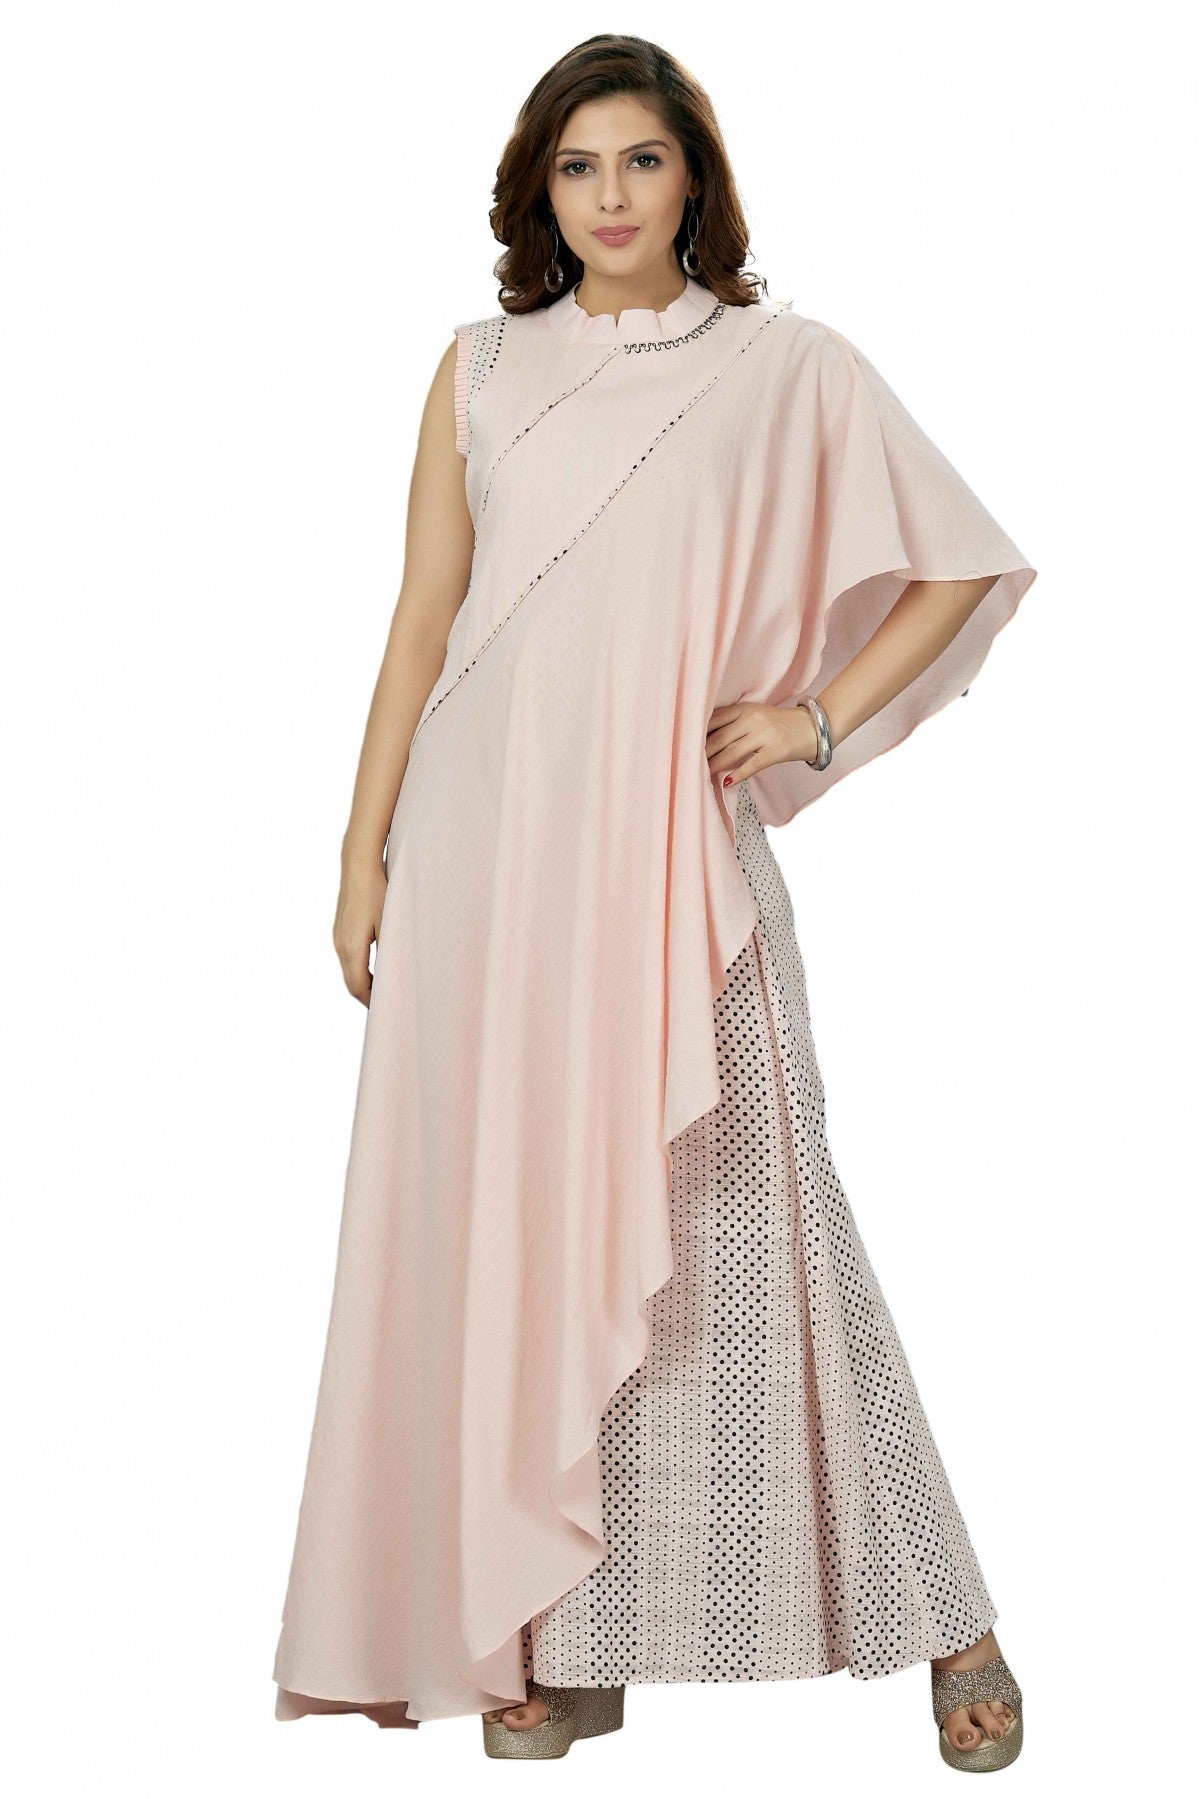 Cotton Party Wear Kurti In Light Pink Colour